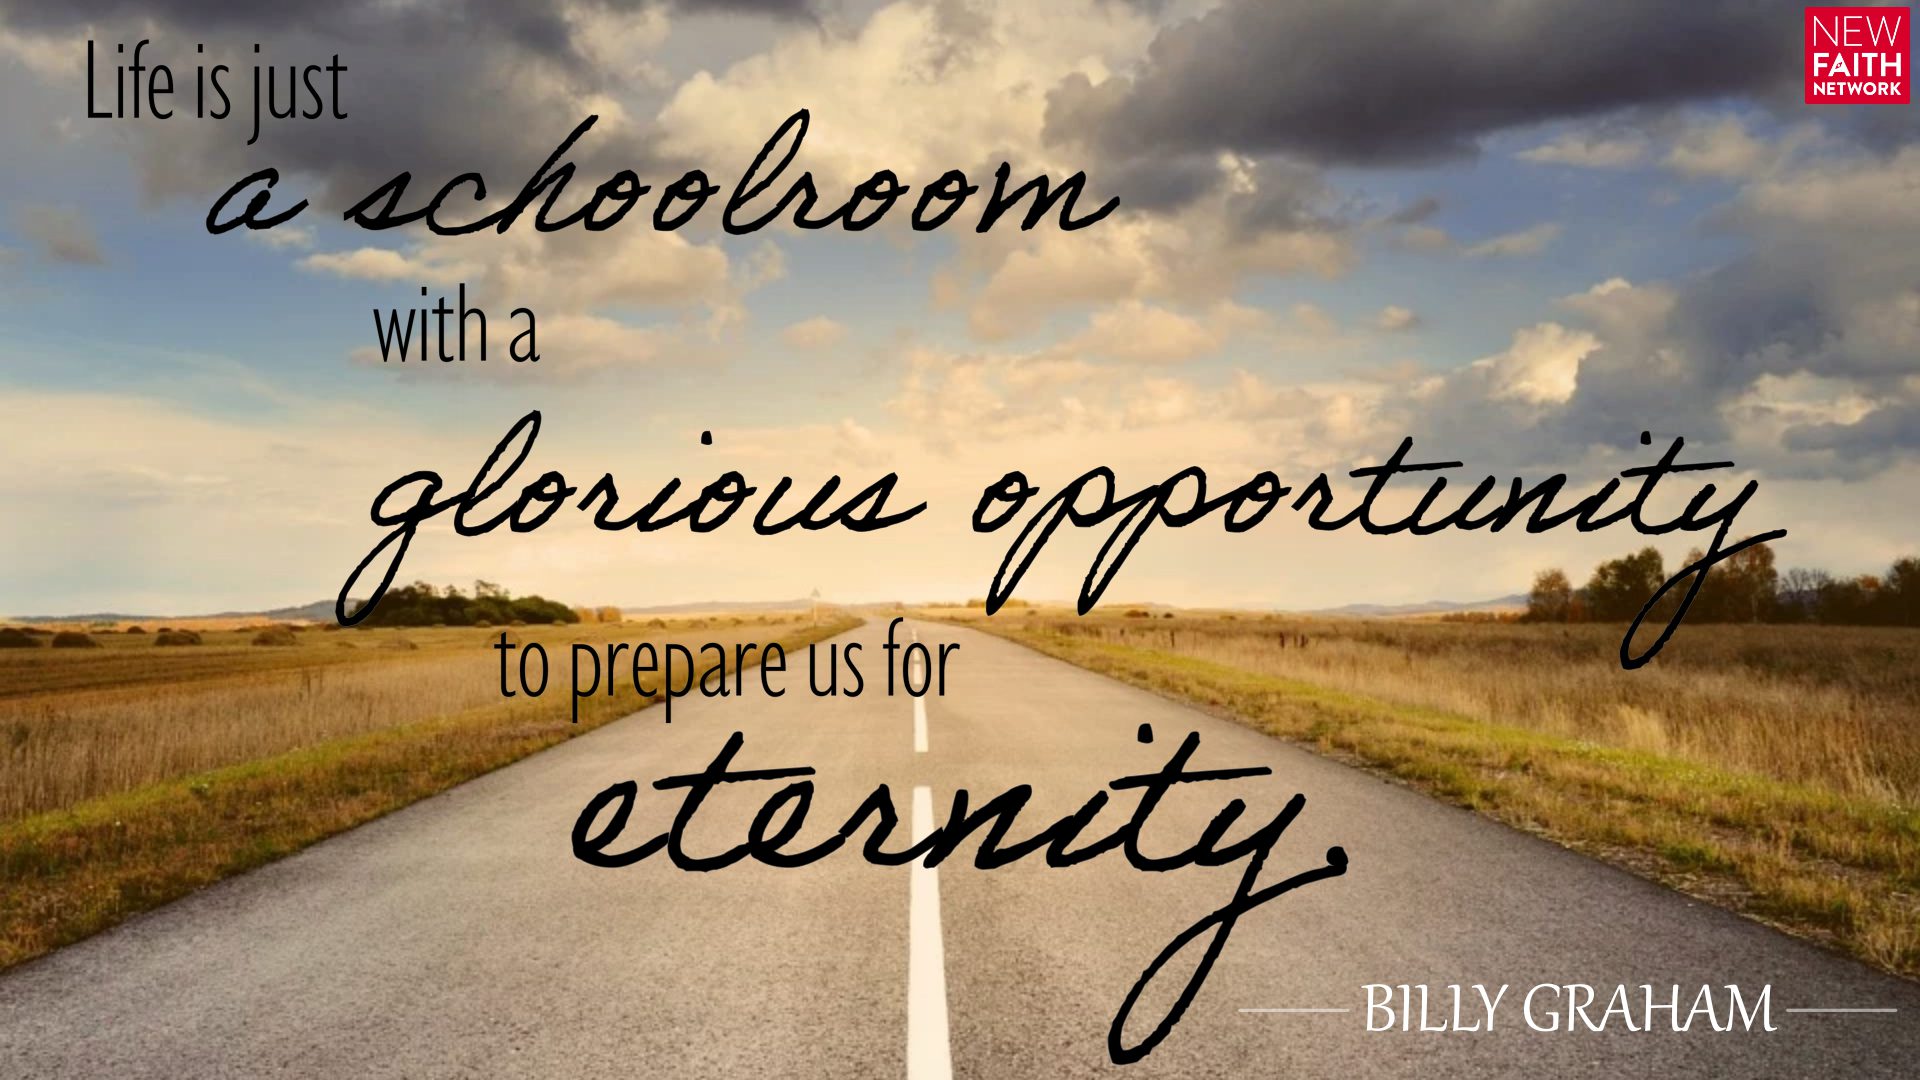 Life is just a schoolroom with a glorious opportunity to prepare us for eternity.